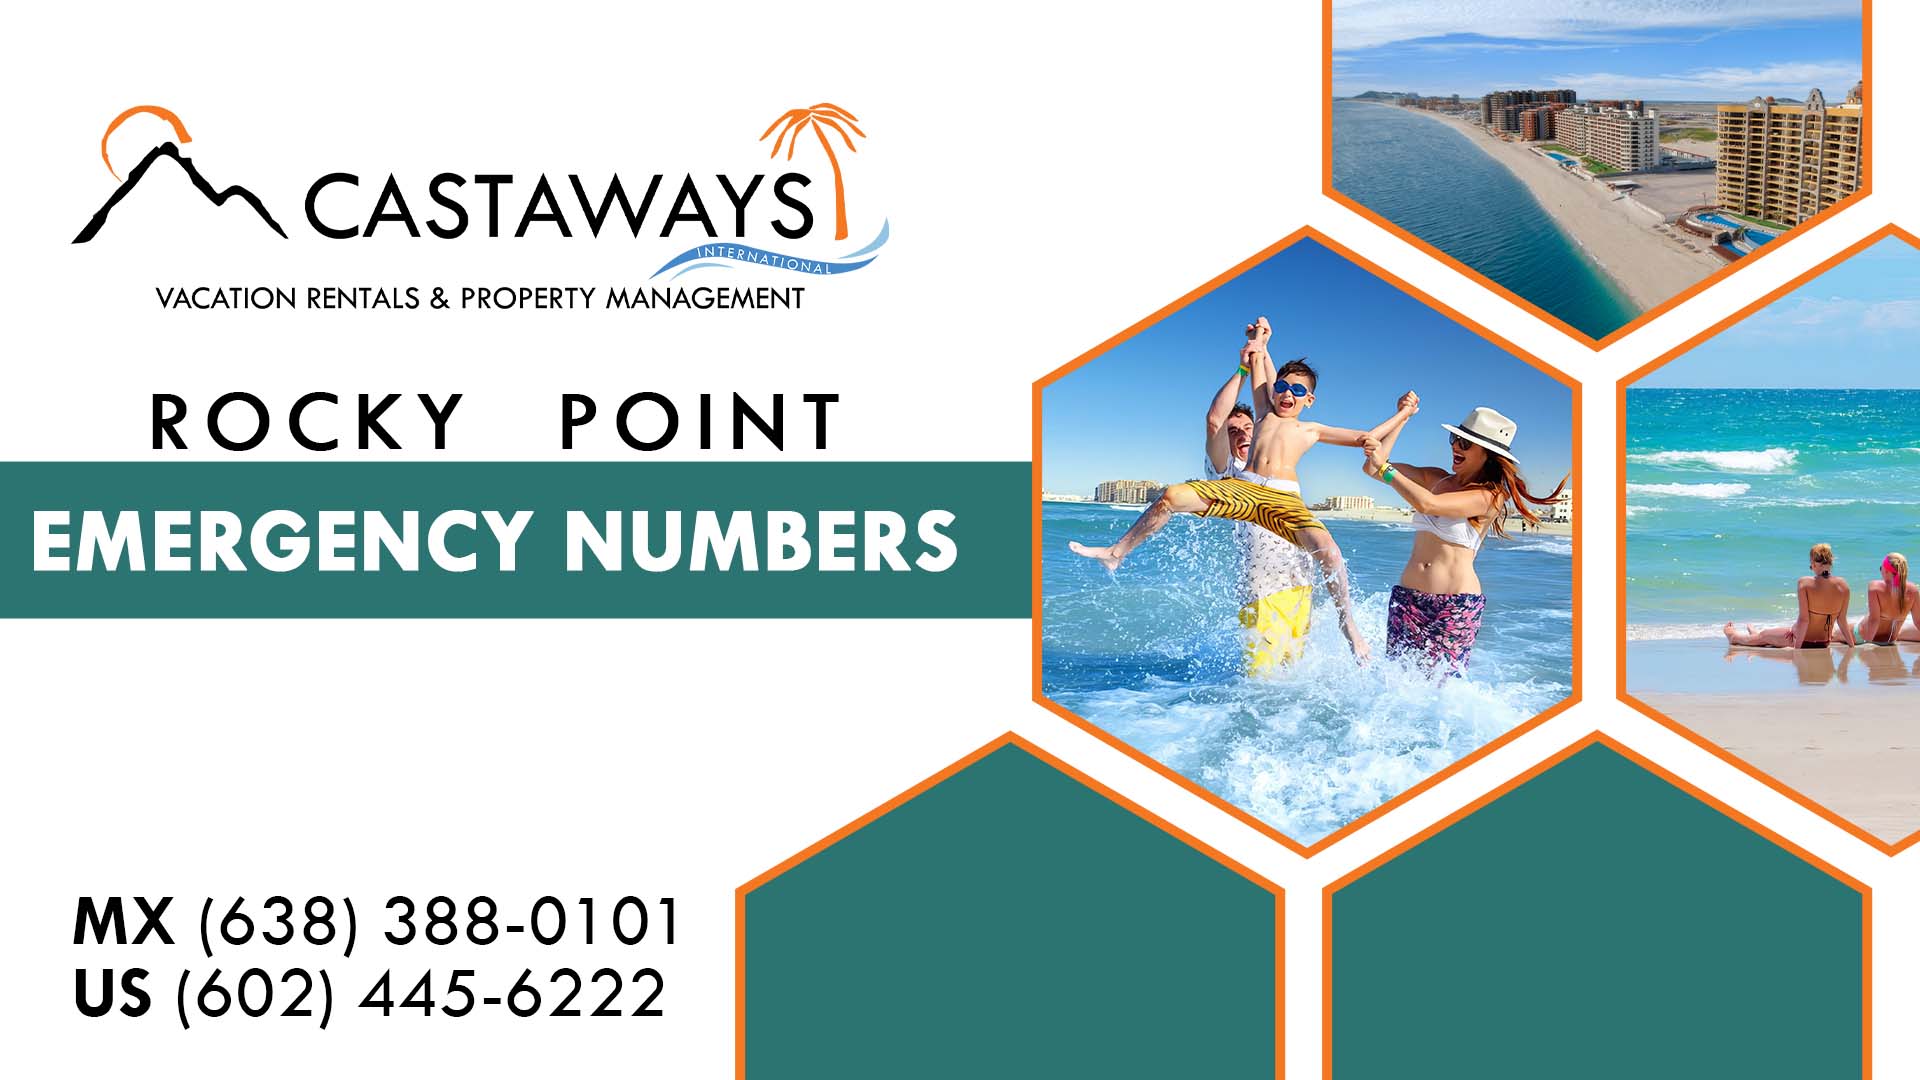 Rocky Point Other Services - Emergency Numbers, Sonoran Spa Puerto Peñasco, Mexico Arizona USA Website Cover